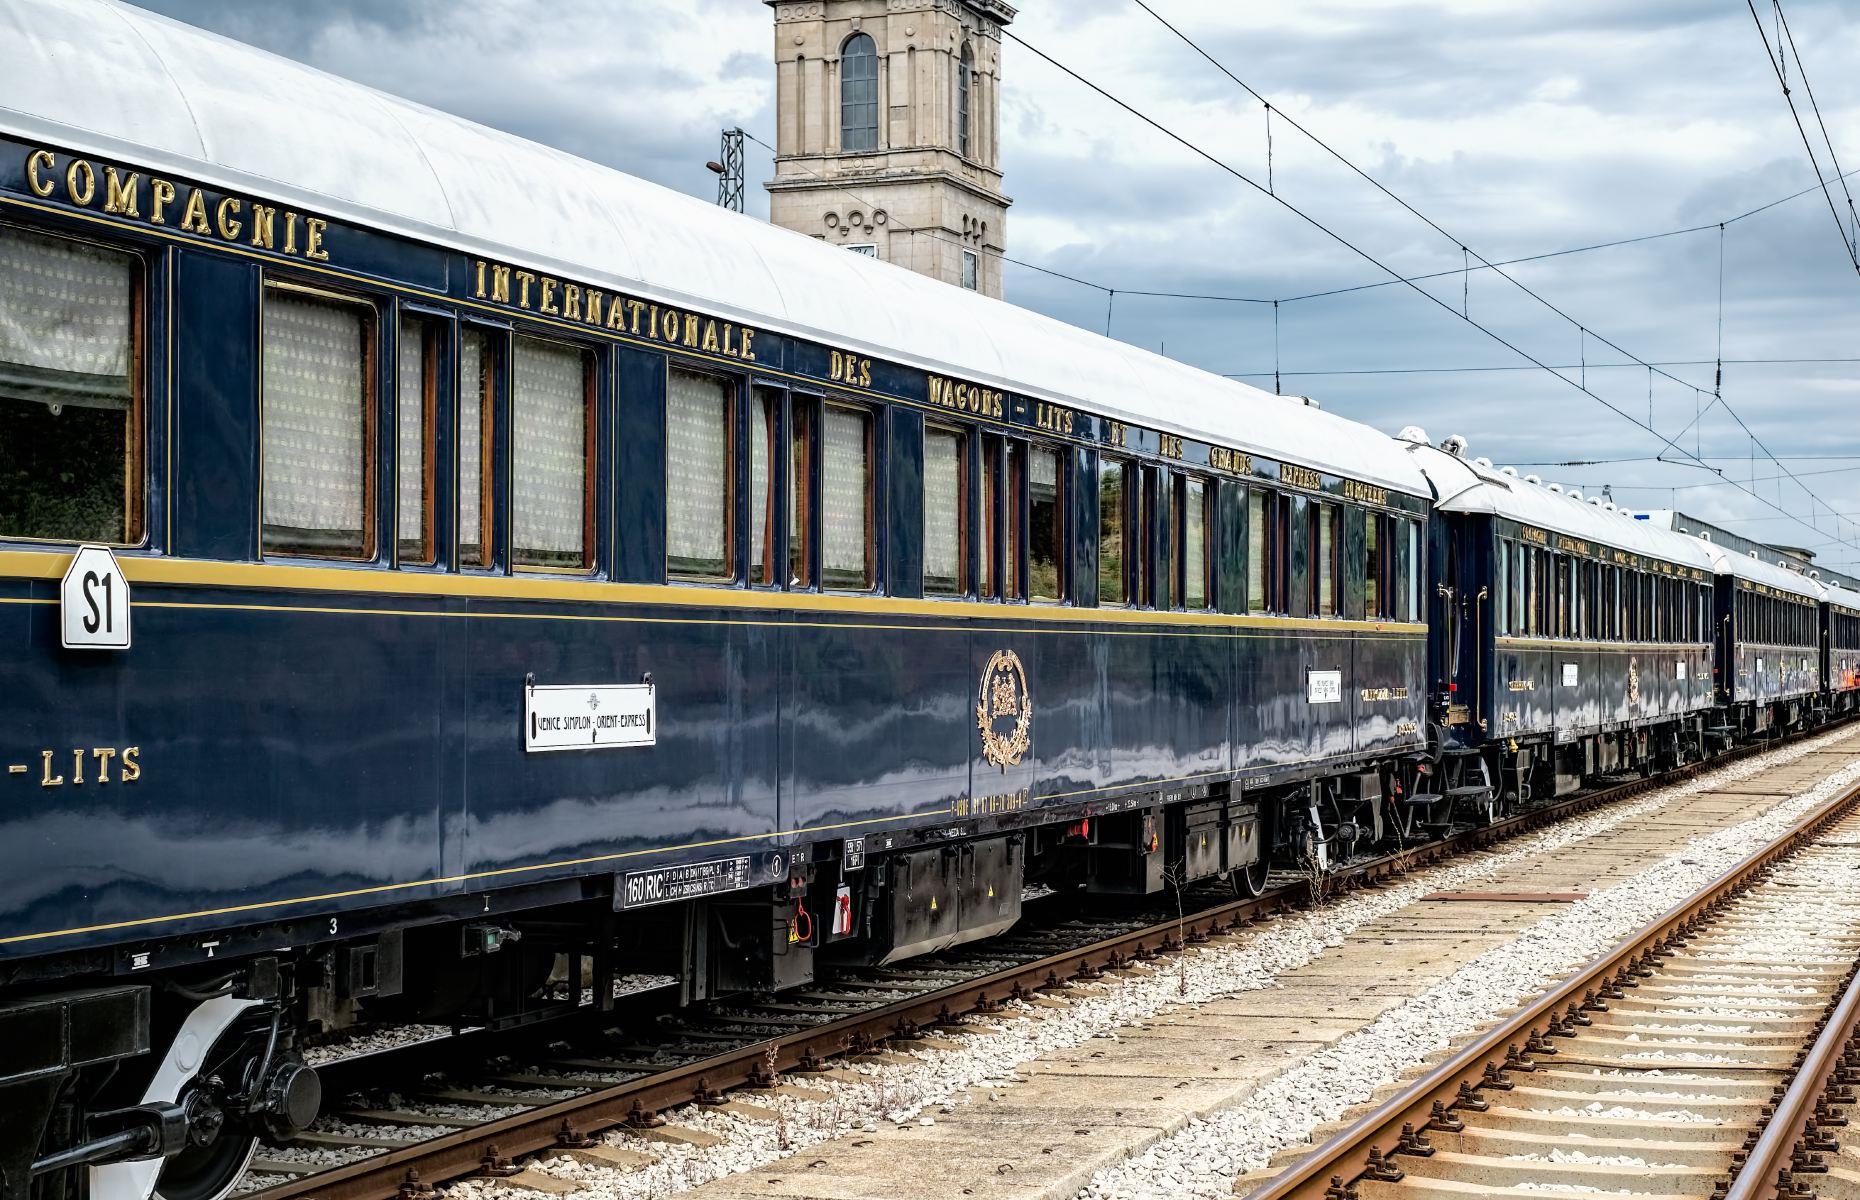 <p>With an aim to evoke a sense of romance and grandeur, the lovingly restored <a href="https://www.belmond.com/trains/europe/venice-simplon-orient-express/">Venice Simplon-Orient-Express</a> makes passengers feel like royalty. Connecting London and Verona via Paris, it’s a chance to see rolling Italian countryside and iconic European cities. In 2022, the Orient Express will also extended its schedule into December (typically it only runs from March until November), making it possible for travellers to enjoy Europe's most beautiful winter landscapes and Christmas markets. </p>  <p><a href="https://www.loveexploring.com/galleries/86683/the-worlds-most-scenic-train-journeys-that-dont-cost-a-fortune?page=1"><strong>These beautiful train journeys don't cost a fortune</strong></a></p>